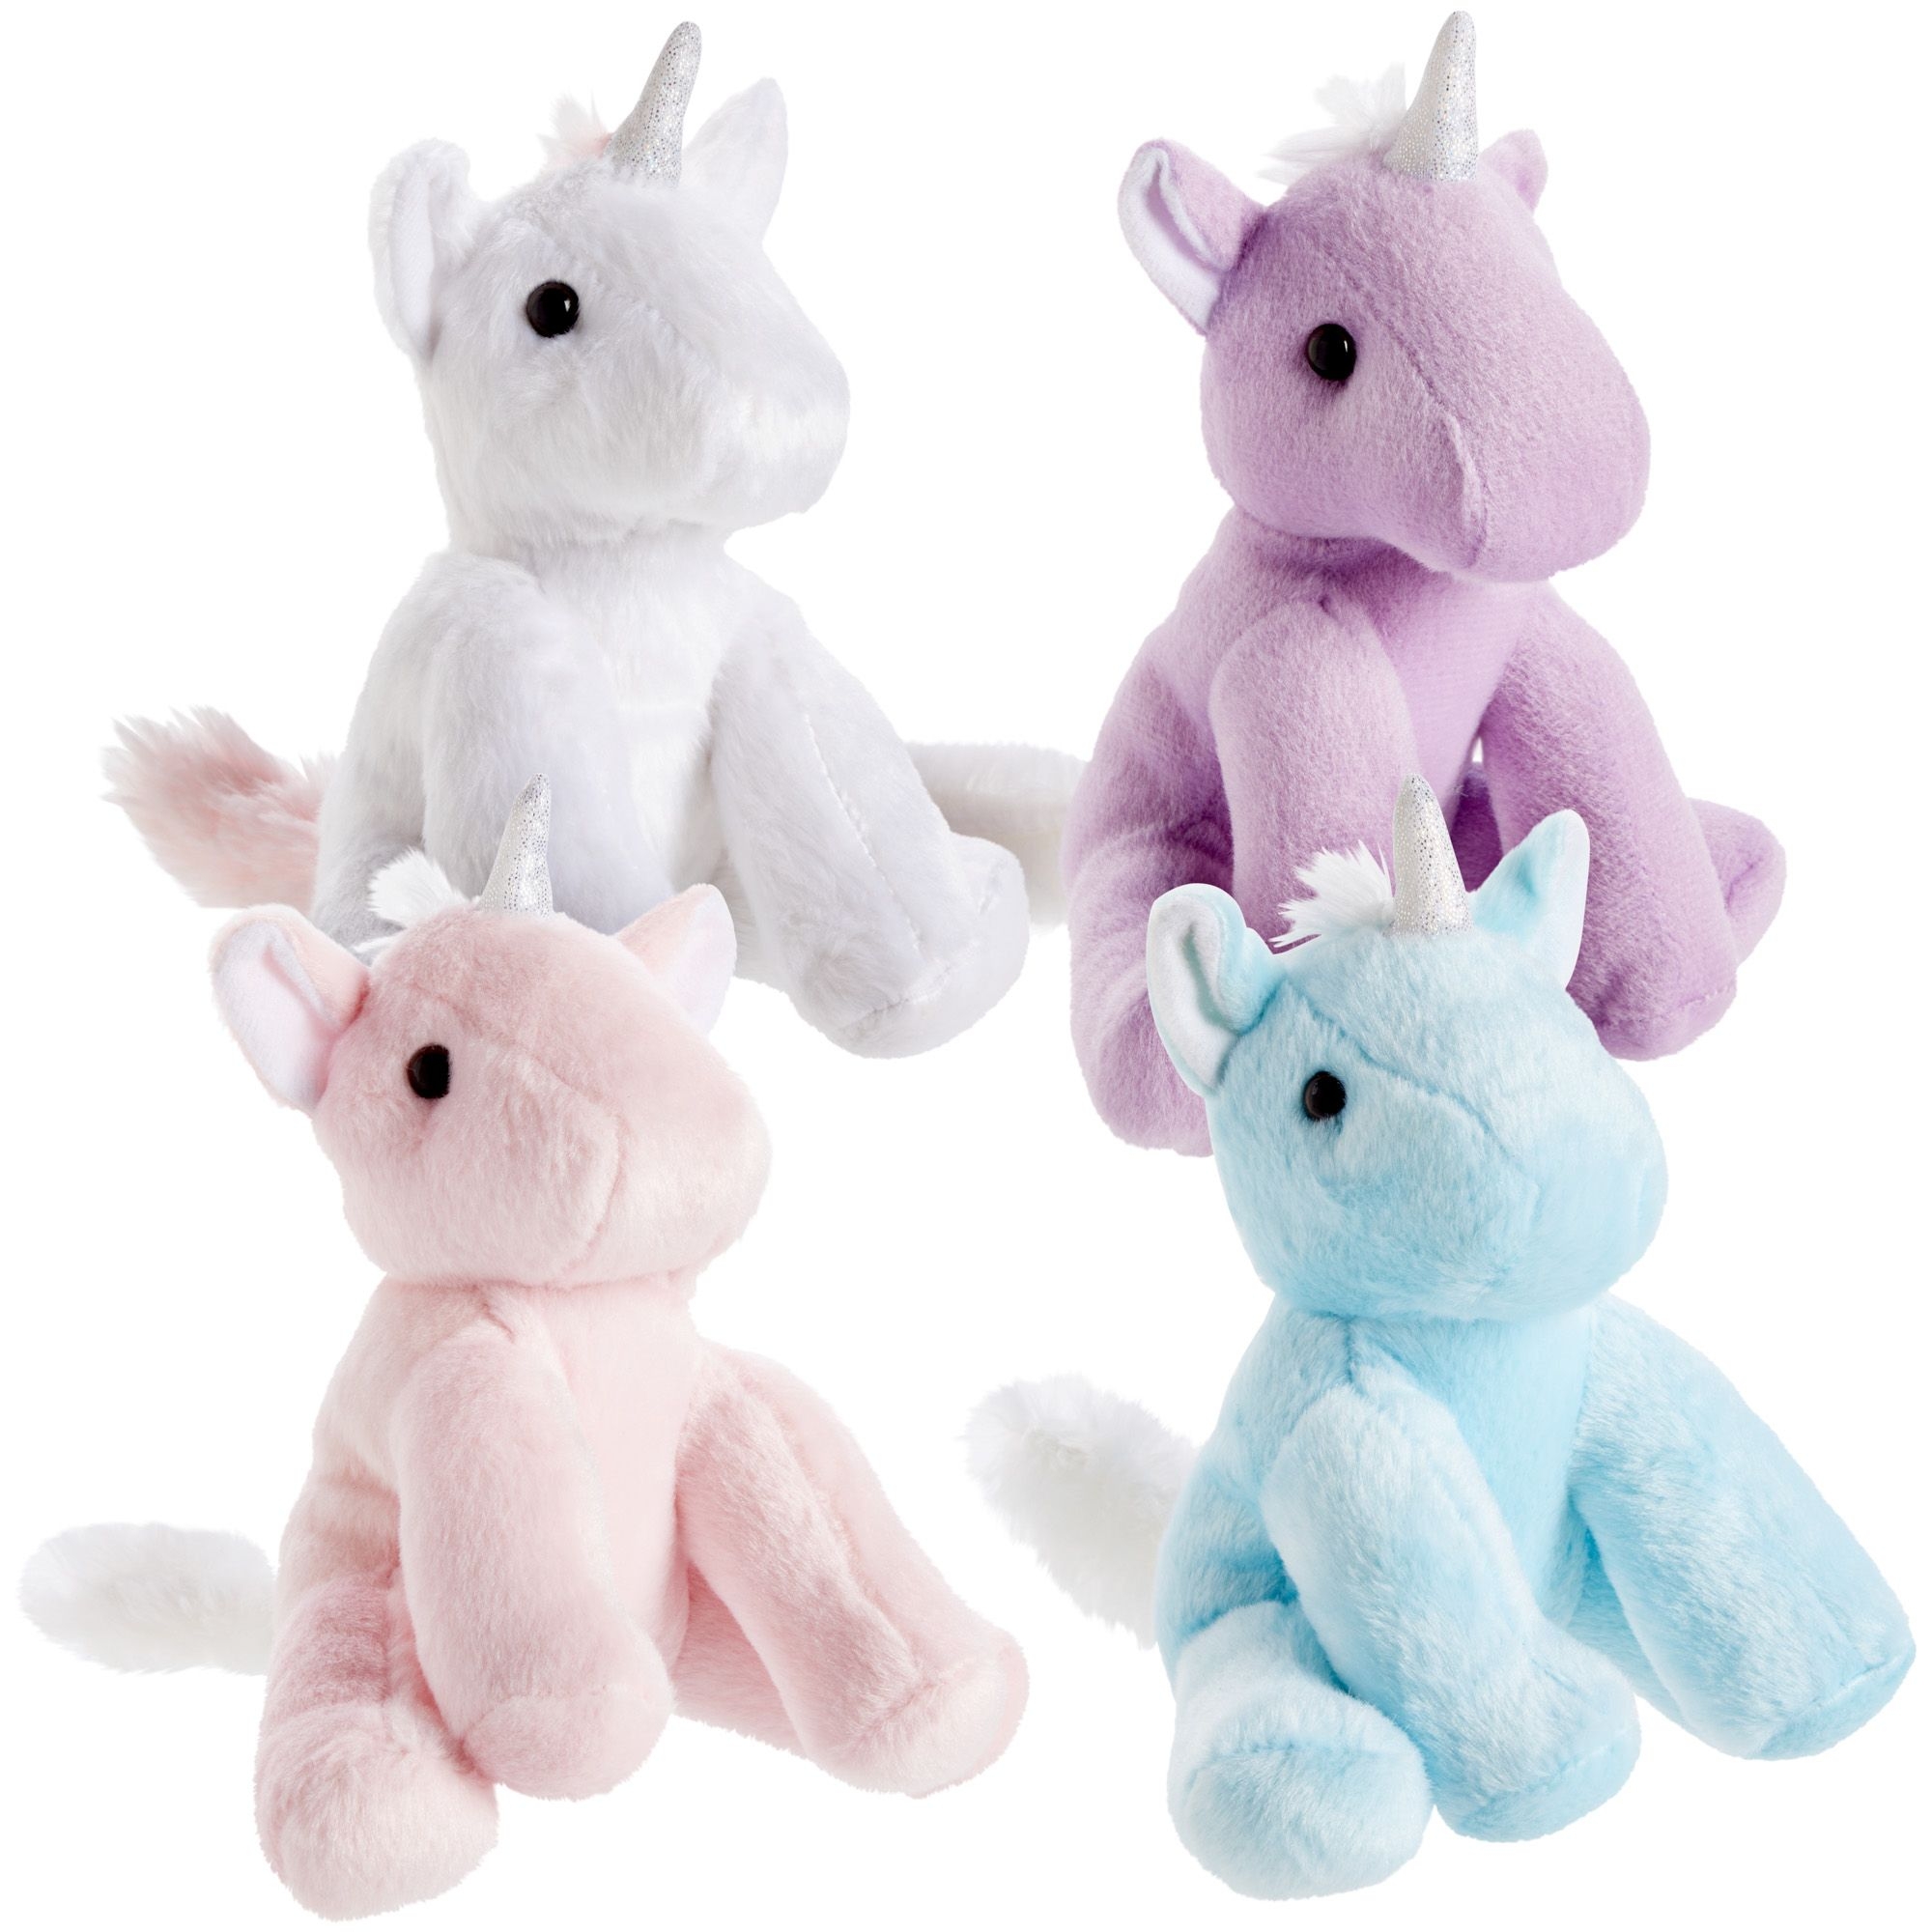 4 Pack Small Unicorn Plush for Girls, 7-inch Stuffed Animal Toys for Kids Birthday Gifts, Pastel Party Favors (4 Colors) - image 1 of 10